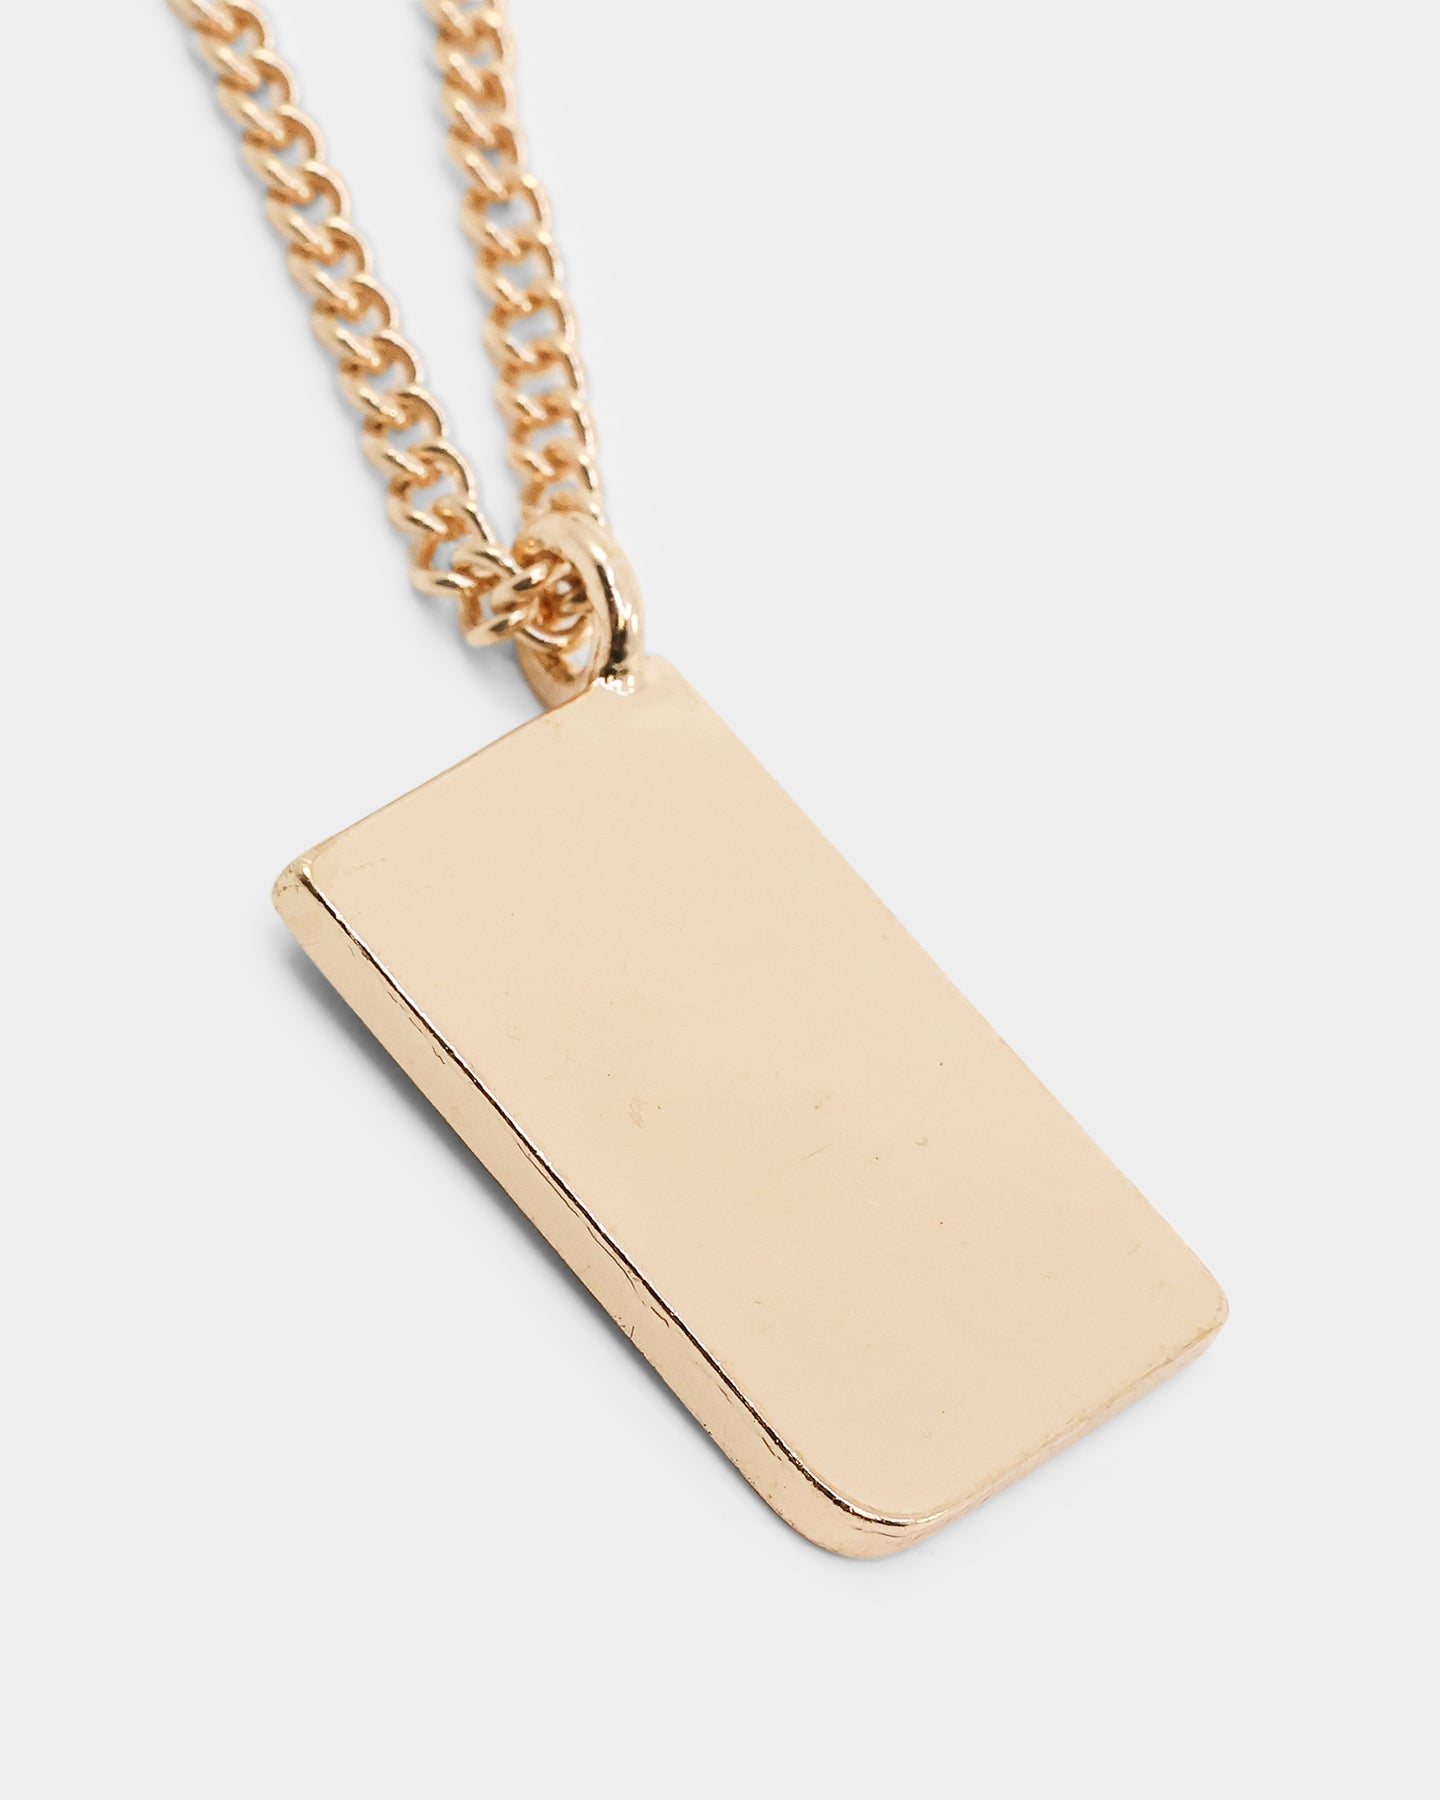 Wild For The Weekend Console Necklace Gold